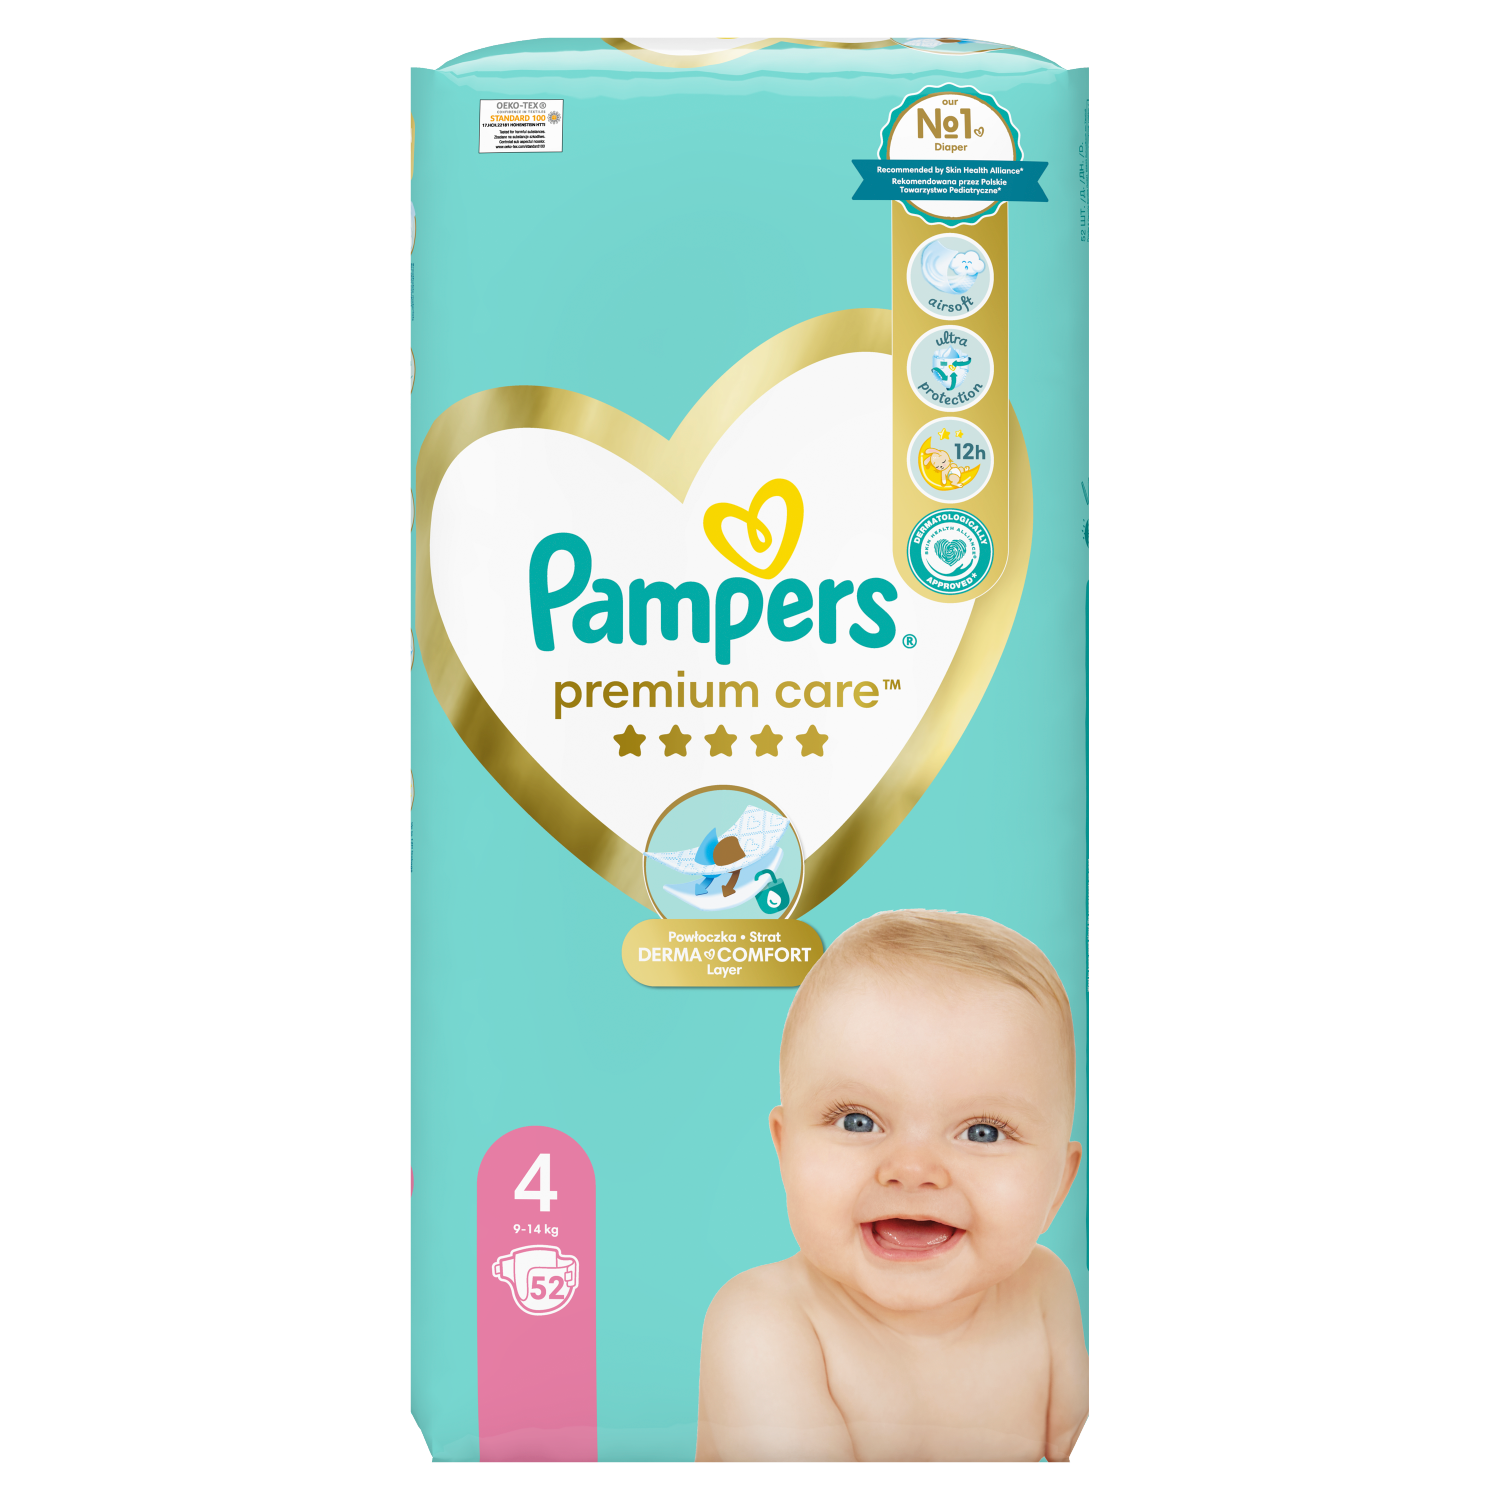 pampers financial statements 2018